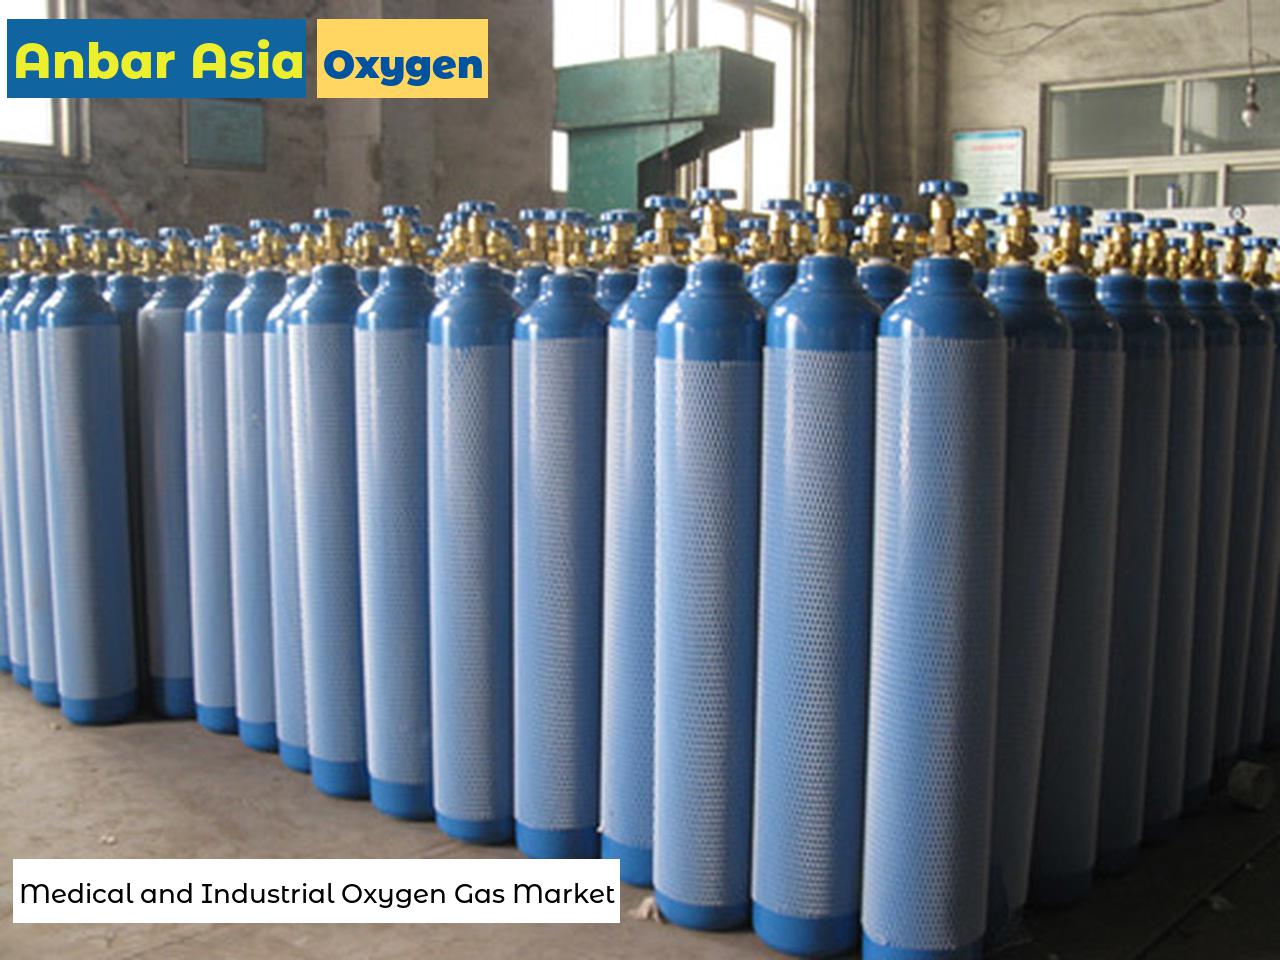 Oxygen - Medical and Industrial Oxygen Gas Market